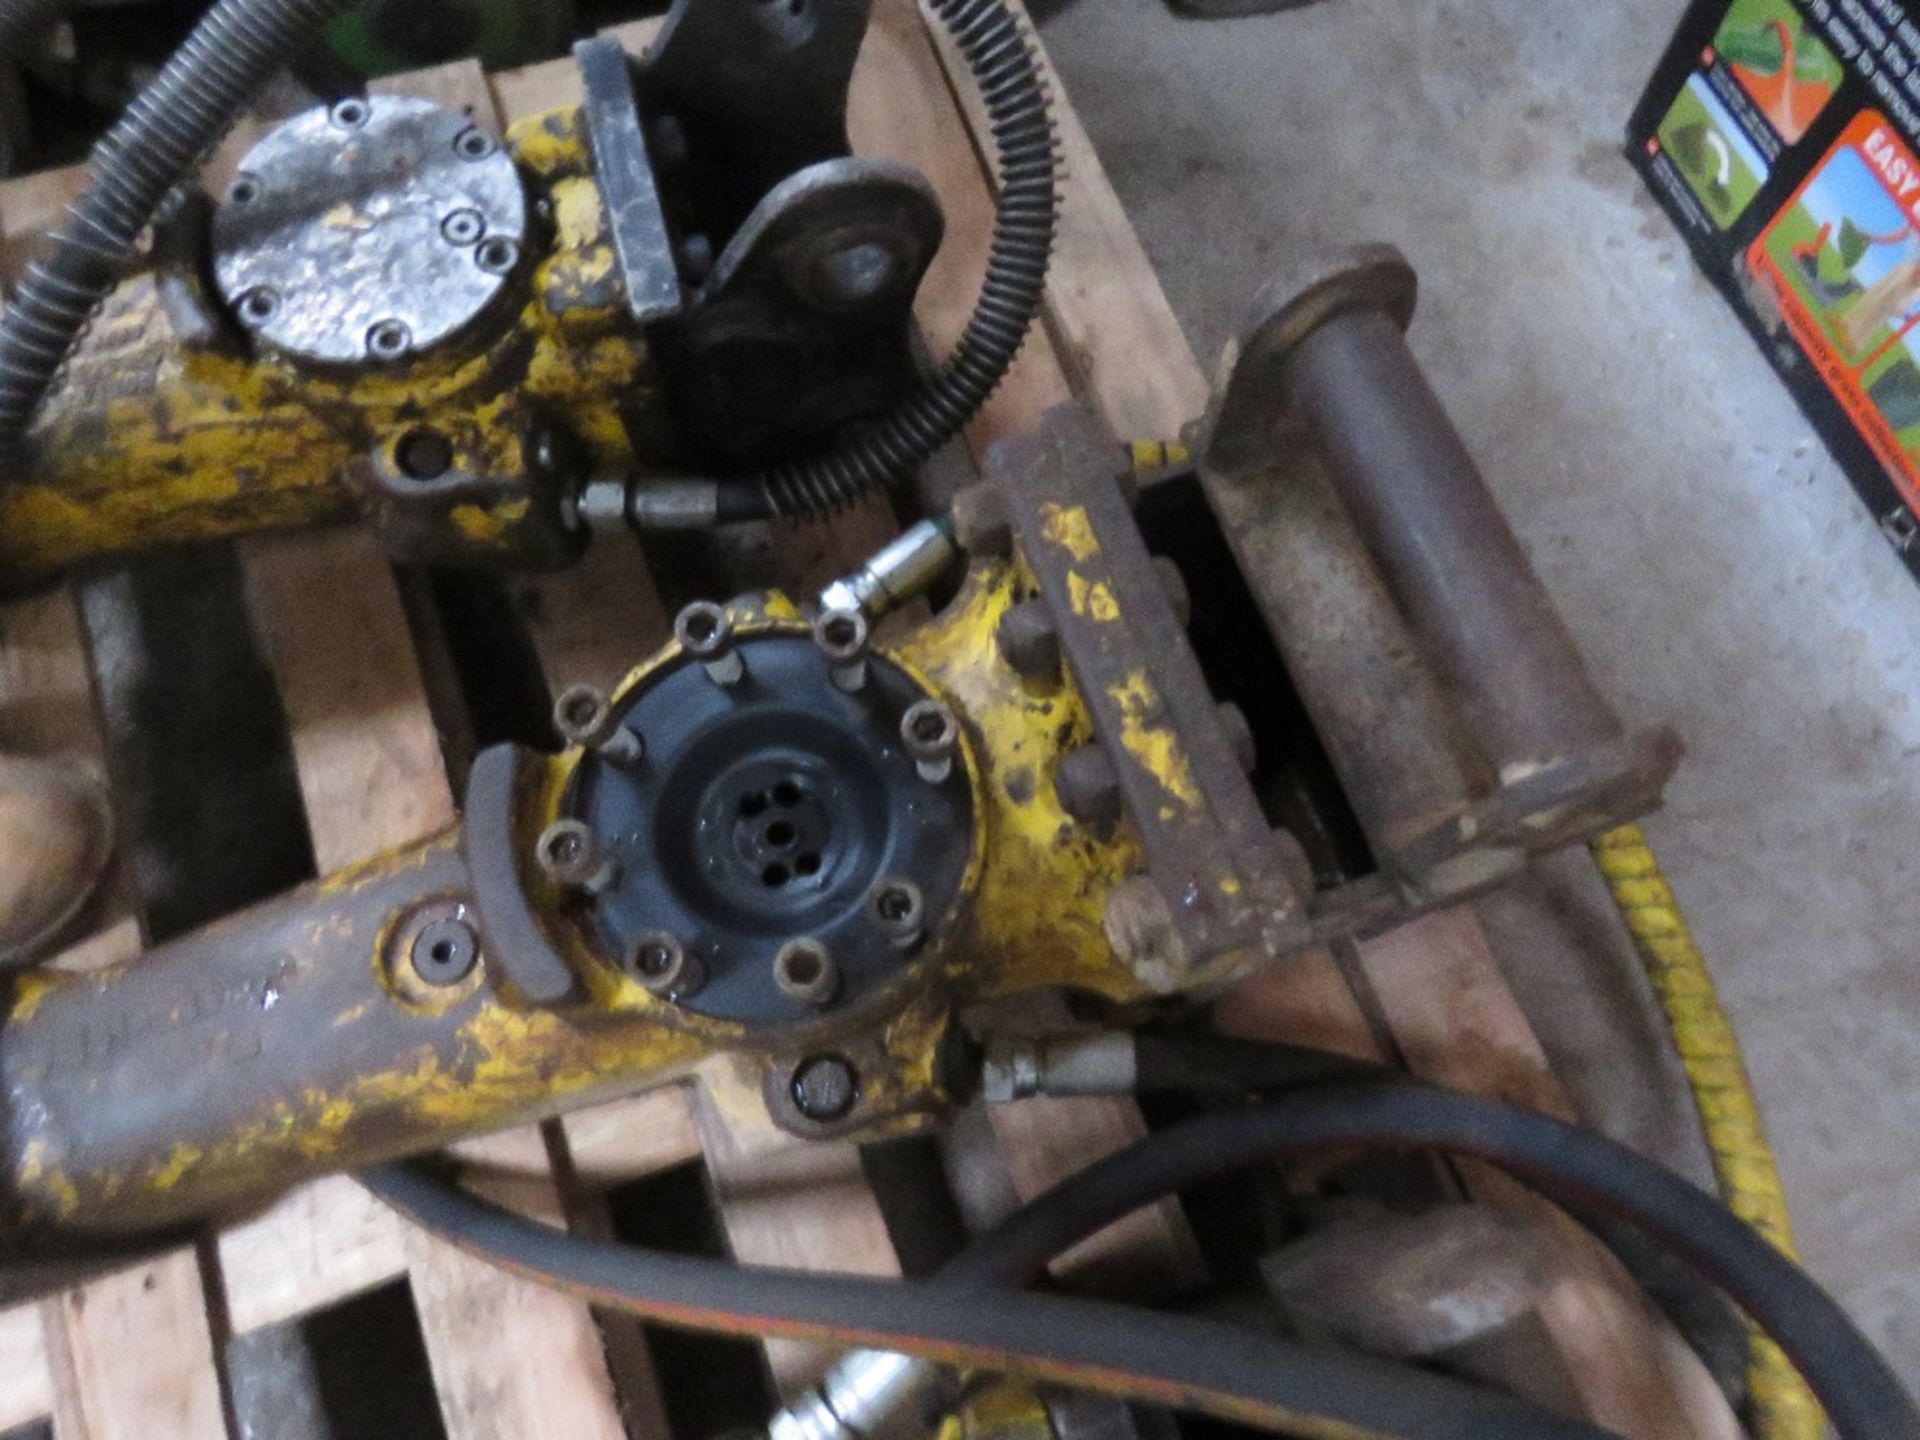 ATLAS COPCO BREAKER FOR 1.5-3 TONNE EXCAVATOR...PARTS MISSING AS SHOWN - Image 3 of 4